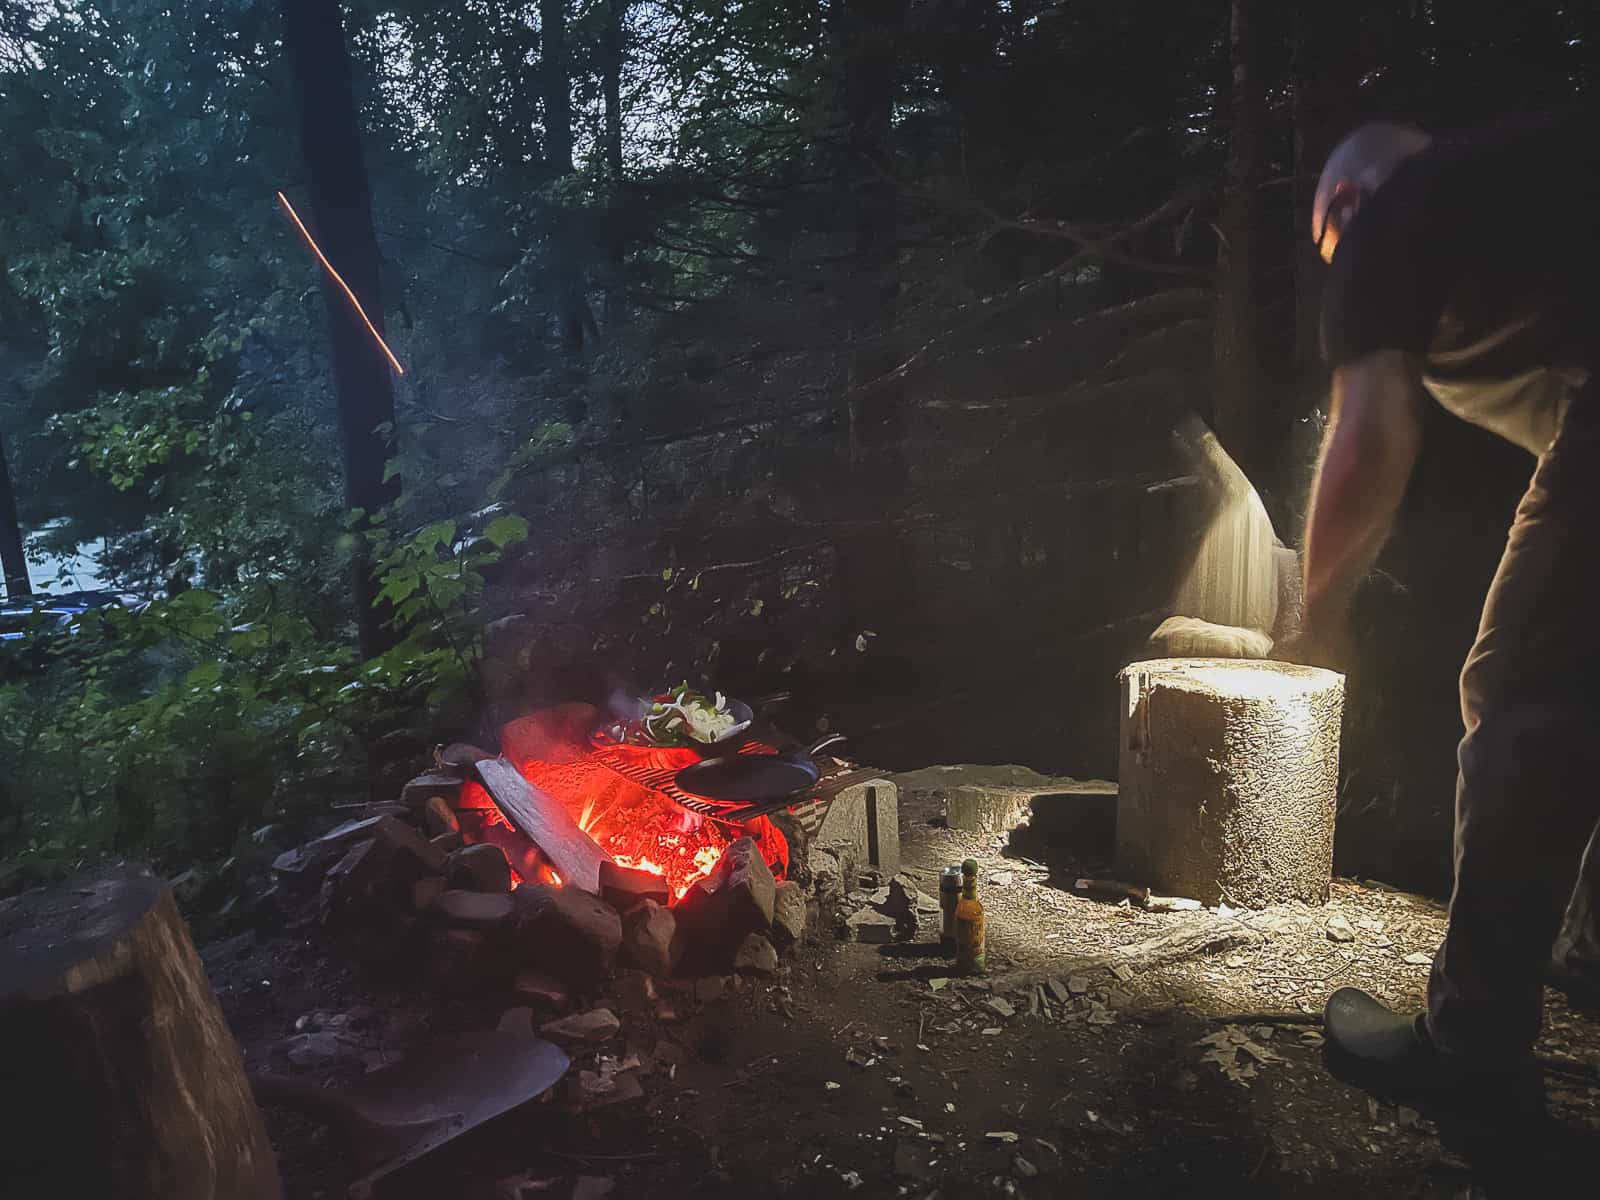 person shining light over open fire with cooking grate and cast iron skillet